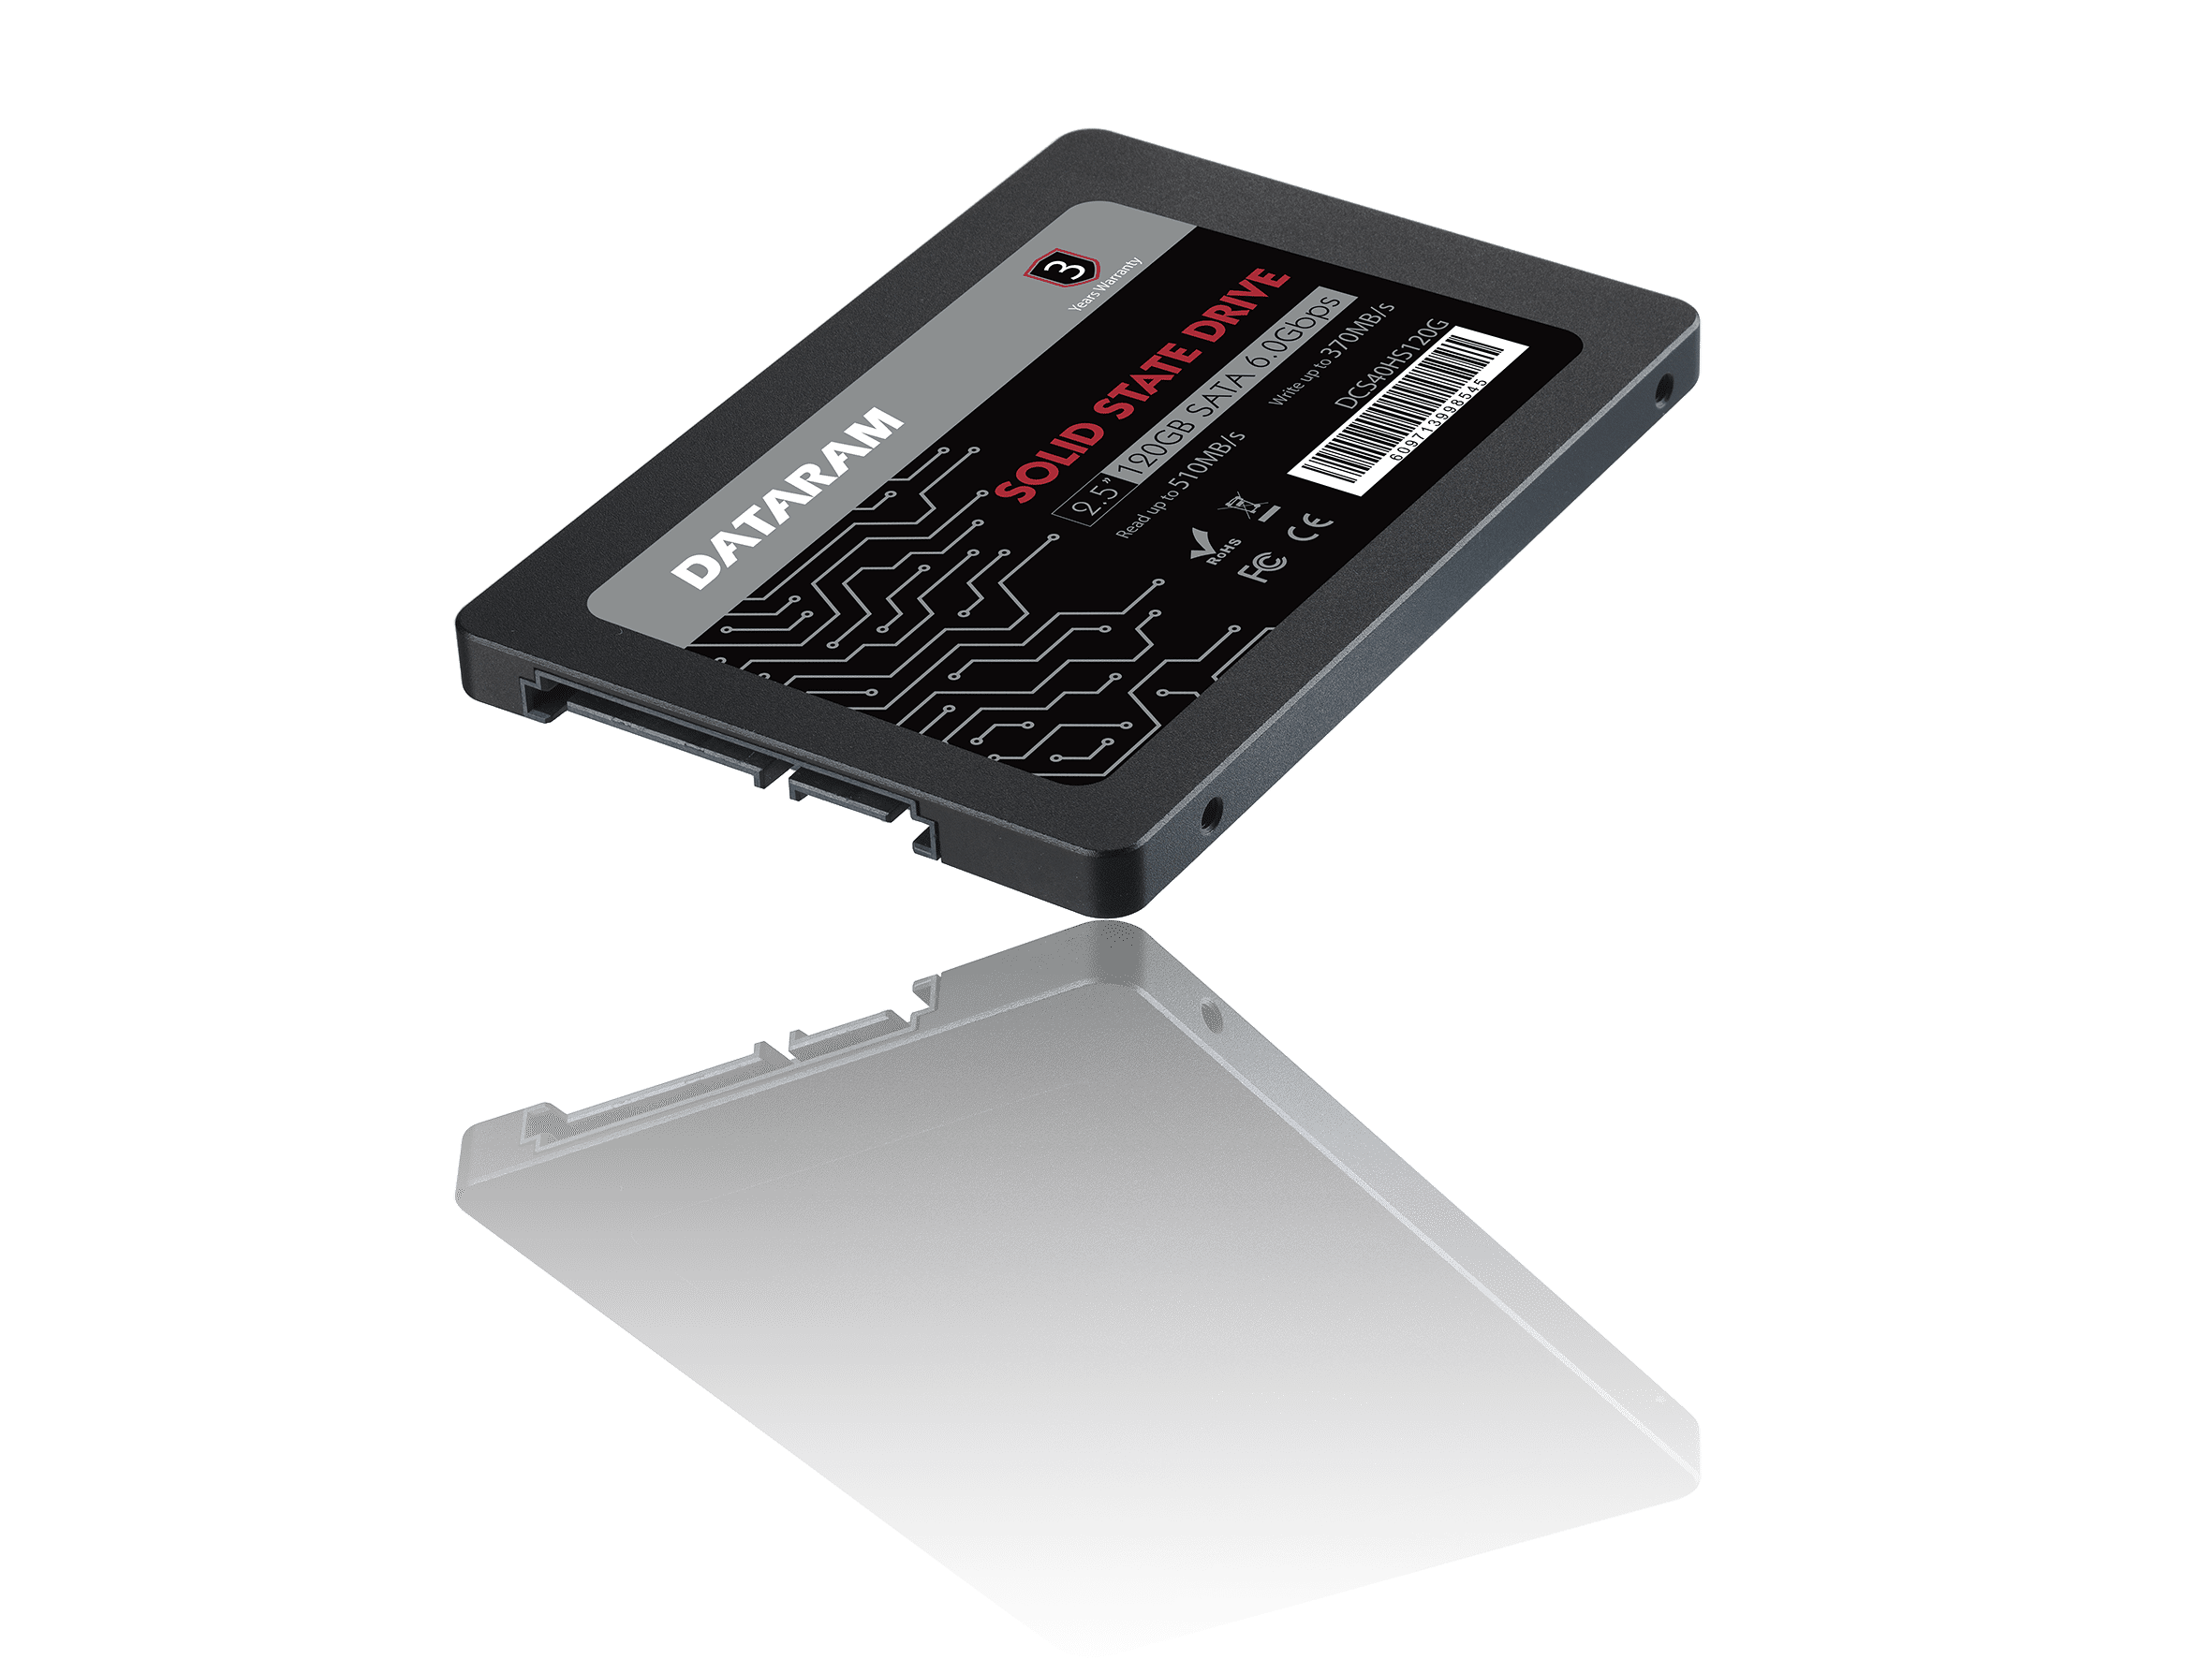 DATARAM 120GB 2.5 SSD Drive Solid State Drive Compatible with GIGABYTE GA-Z170X-GAMING 6 